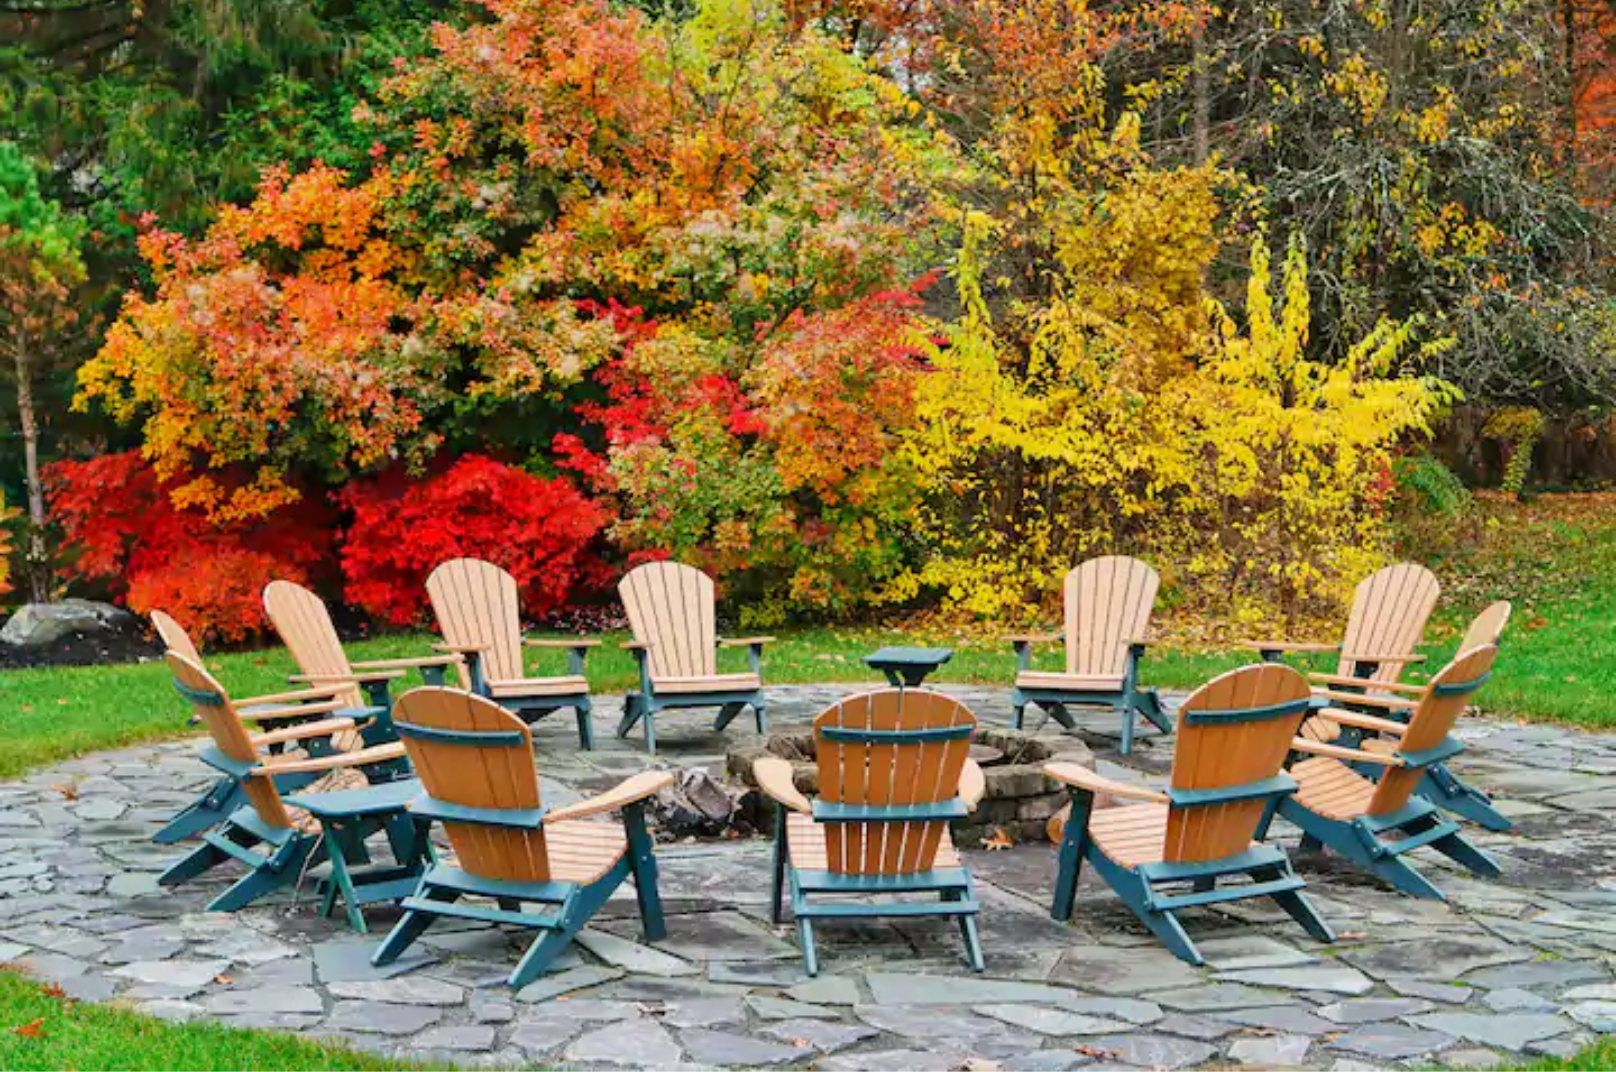 the best Airbnbs in Upstate New York